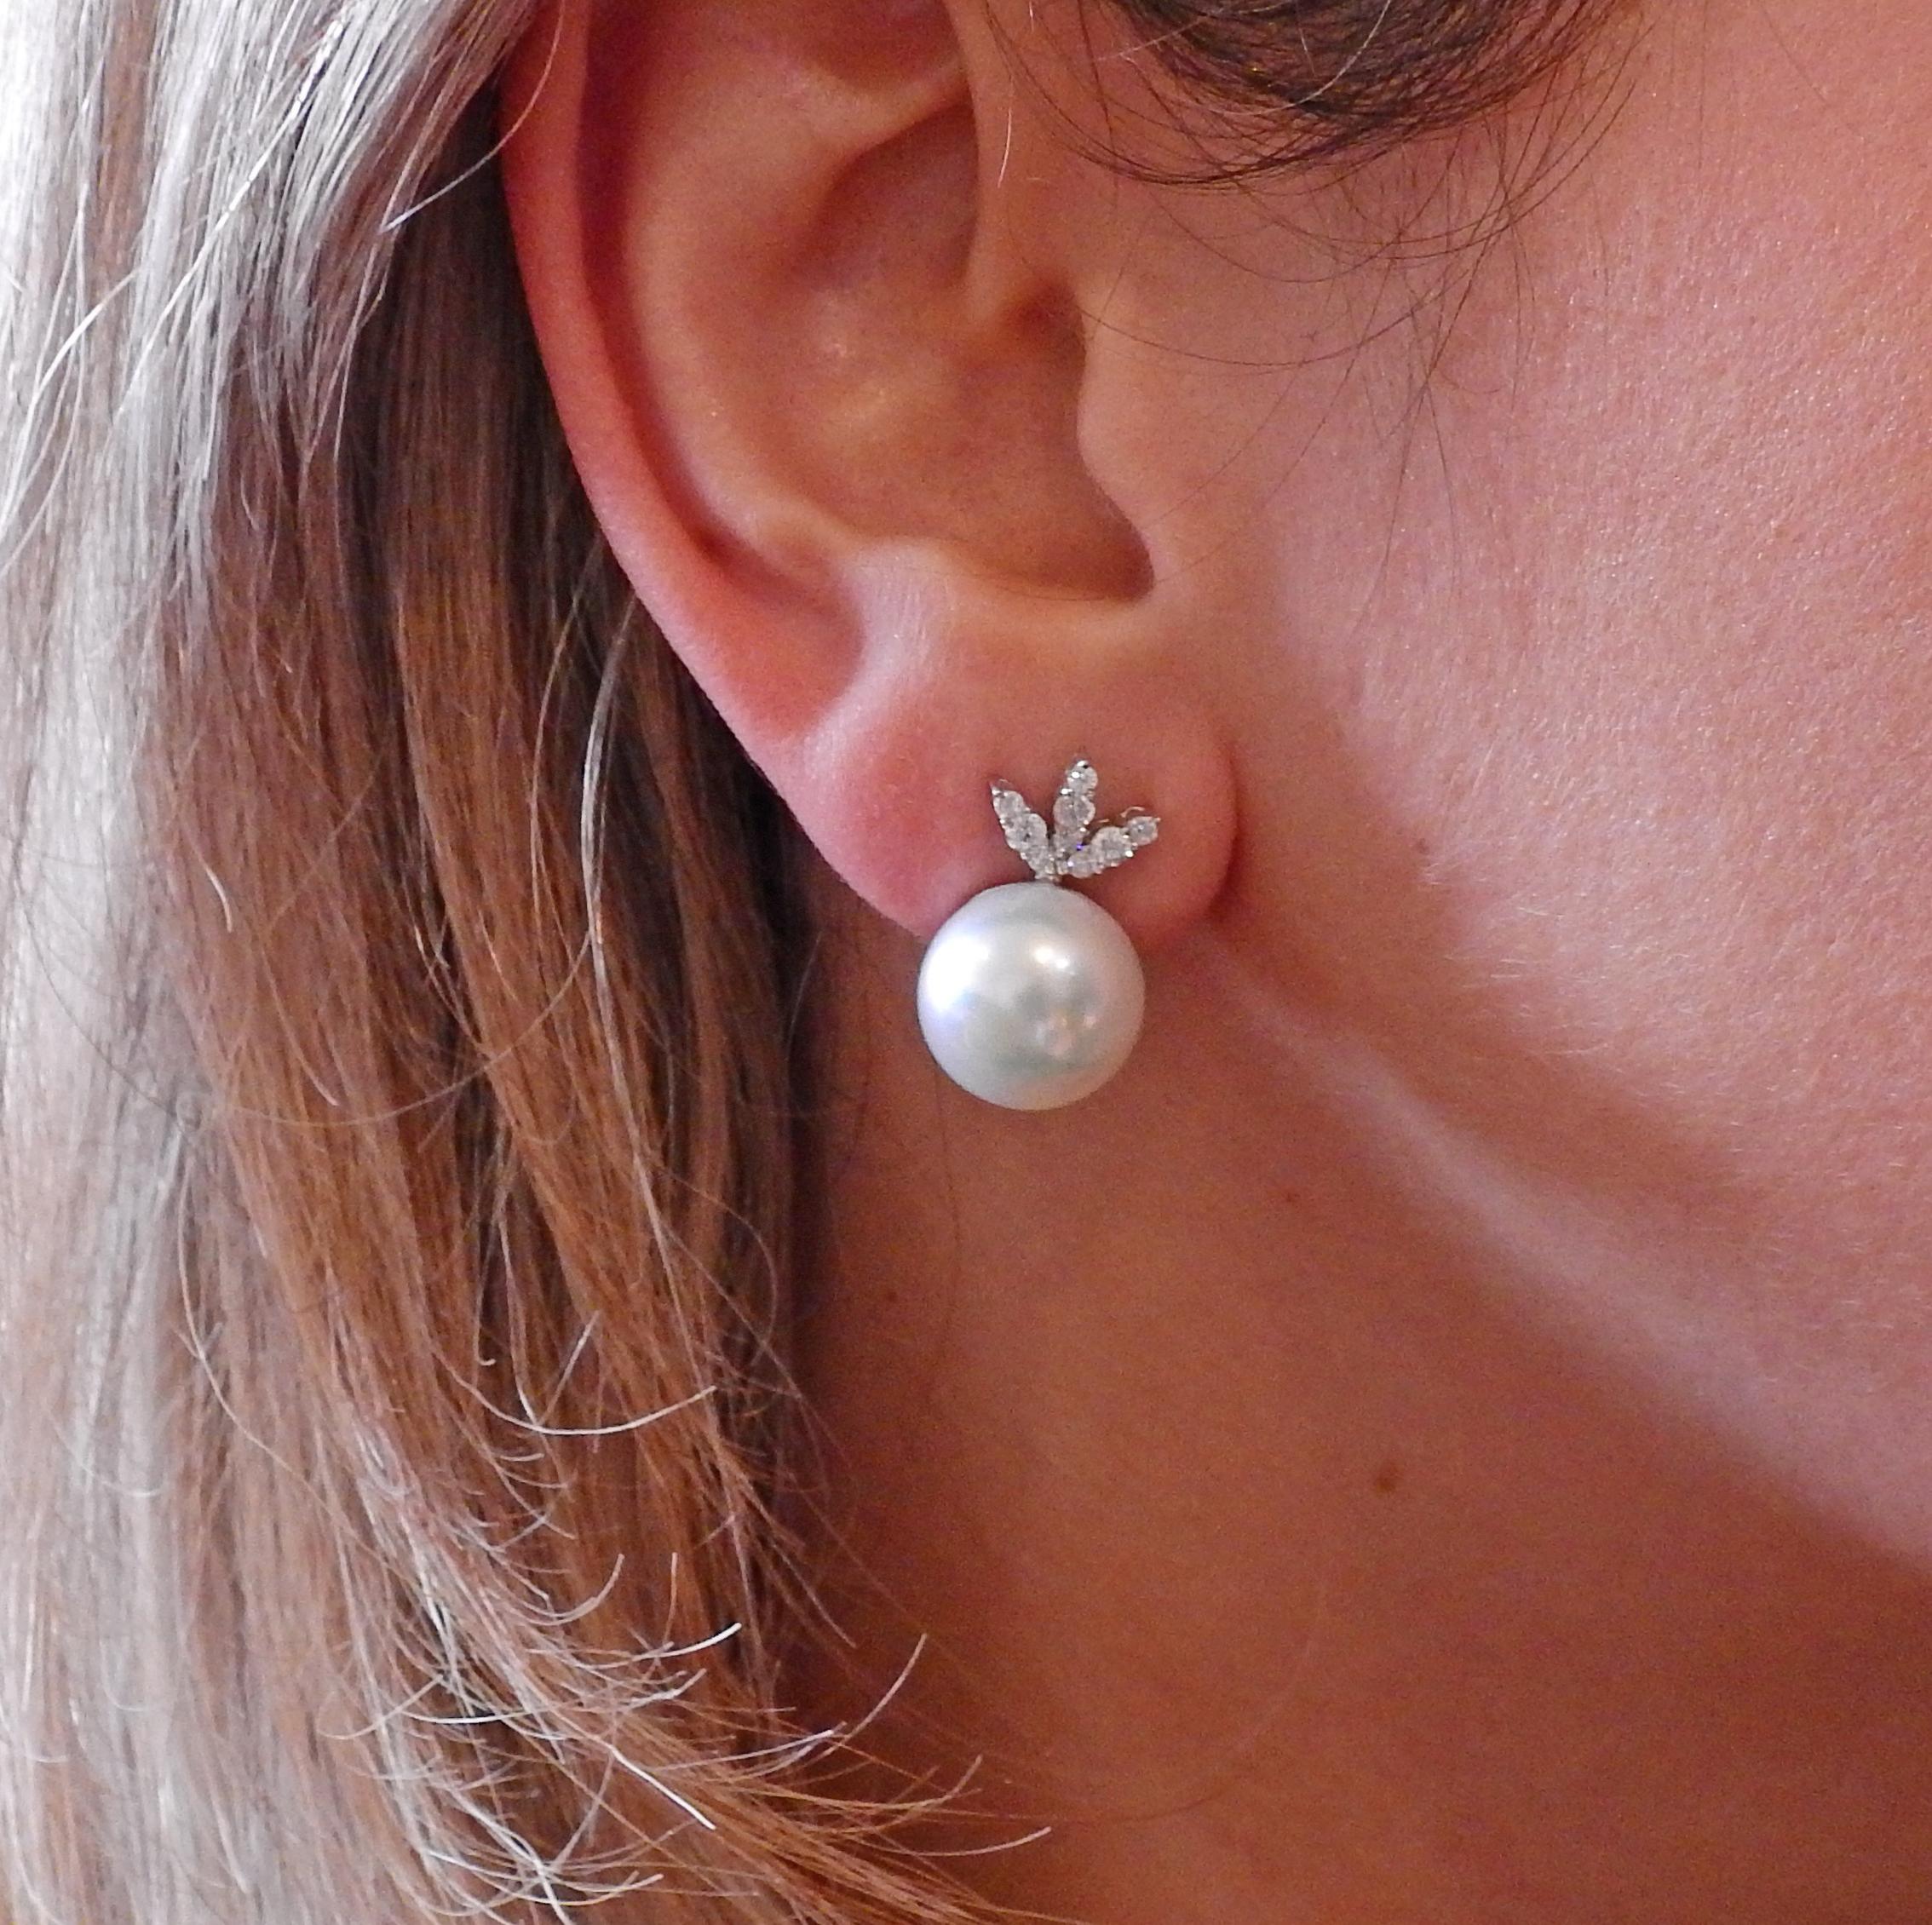 Pair of classic 18k white gold earrings, featuring 13.7mm South Sea pearls, accented by approx. 0.48ctw in SI1-SI2/H diamonds.  Earrings measure 22mm x 14mm. Weight is 12.9 grams. Marked: 18k Maker's mark.